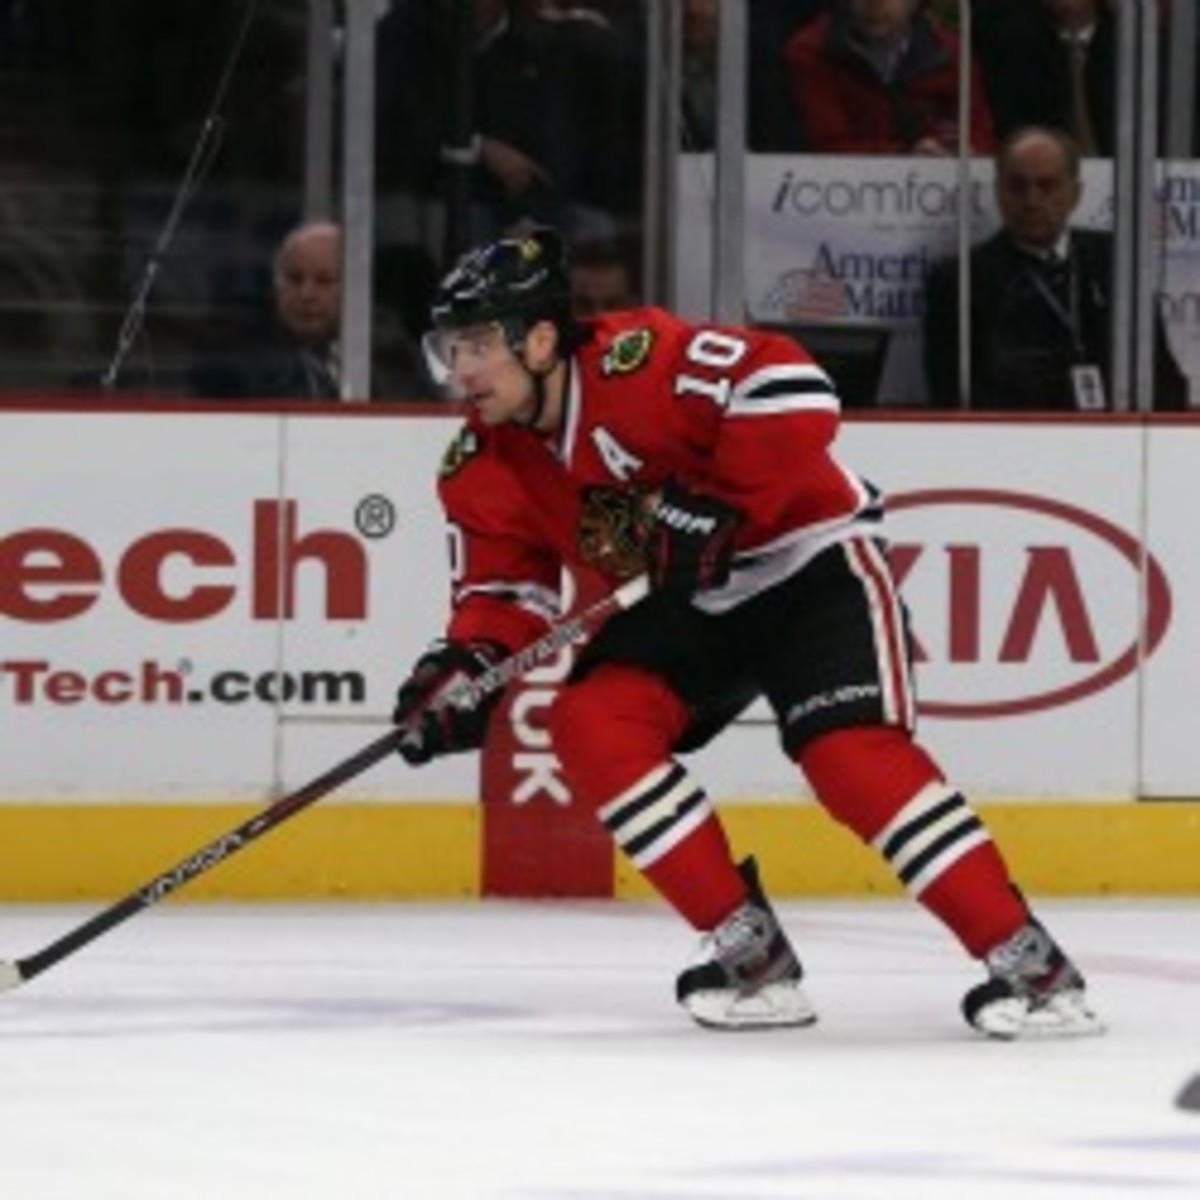 Blackhawks left wing Patrick Sharp will be out 3-4 weeks with an injured shoulder. (Jonathan Daniel/Getty Images)